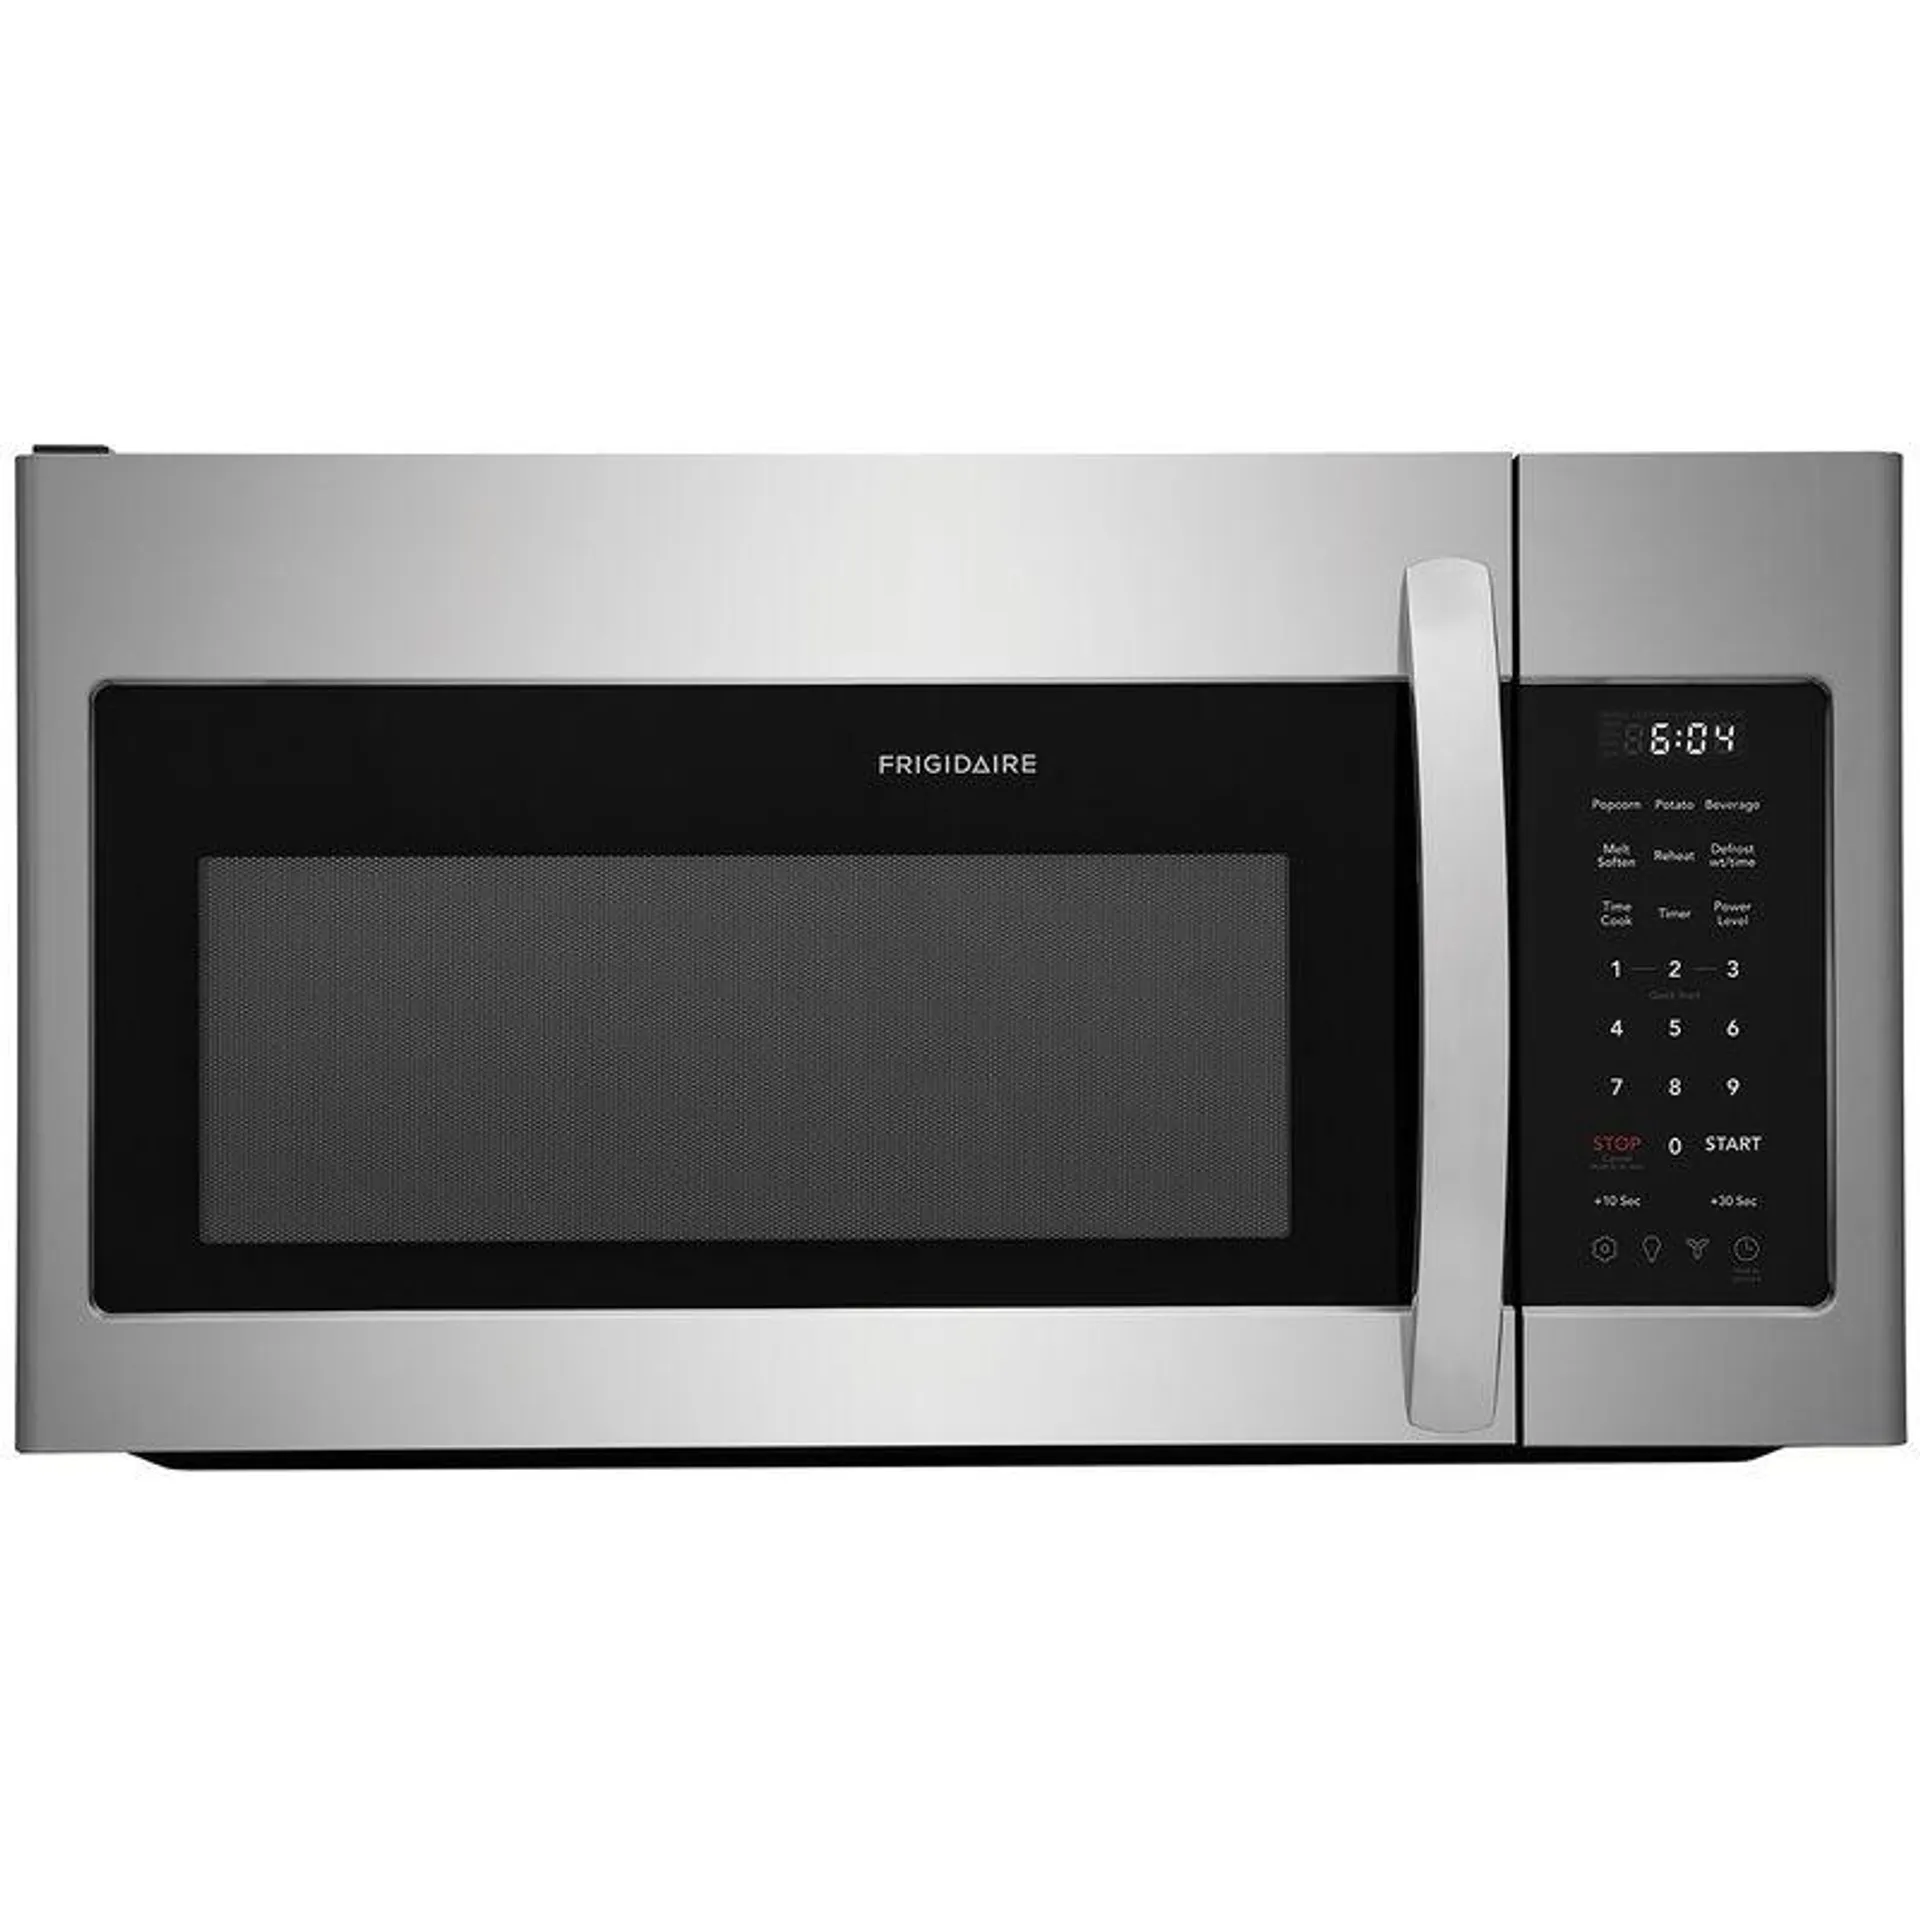 Frigidaire 30 in. 1.8 cu. ft. Over-the-Range Microwave with 10 Power Levels & 300 CFM - Stainless Steel